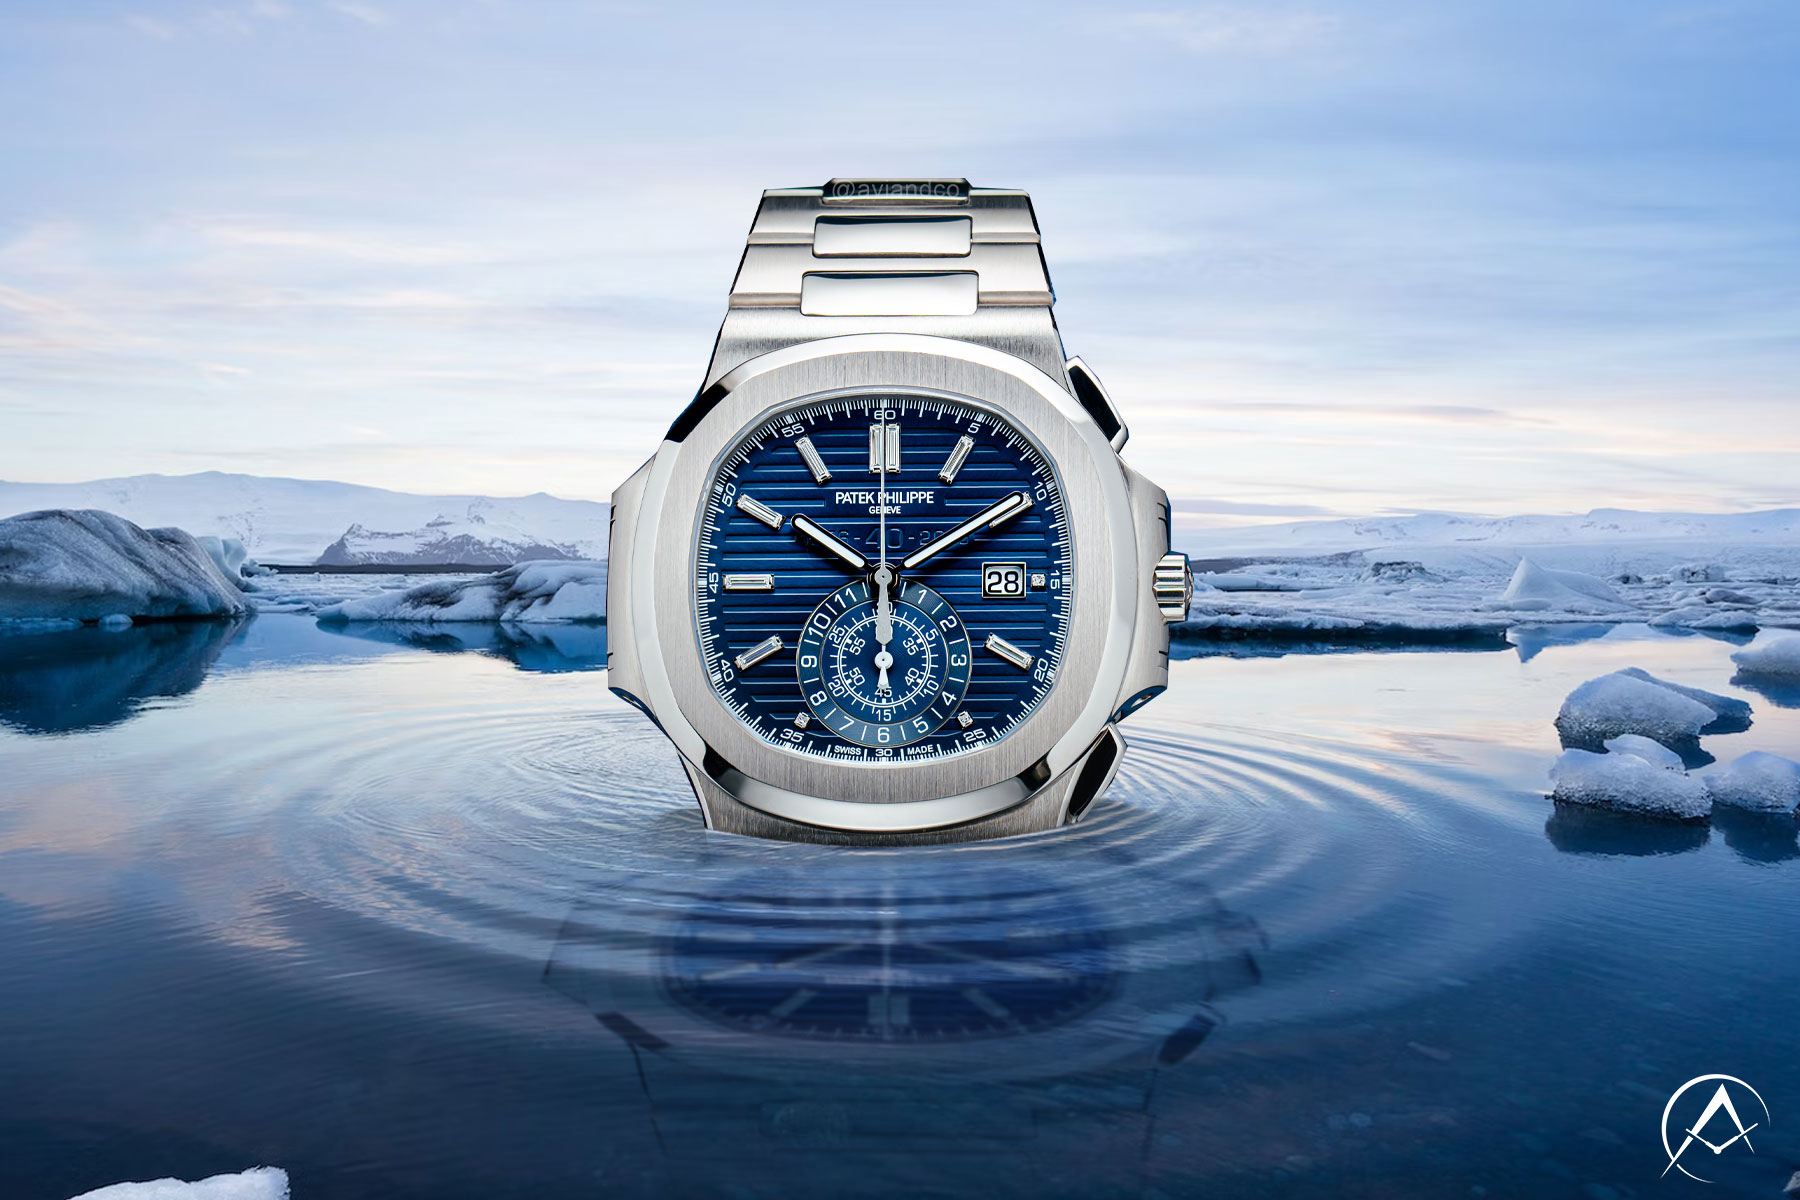 18K White Gold 44 mm Patek Philippe Nautilus with Blue Dial, Index Hour Markers, Date Function, and Chronograph Function.